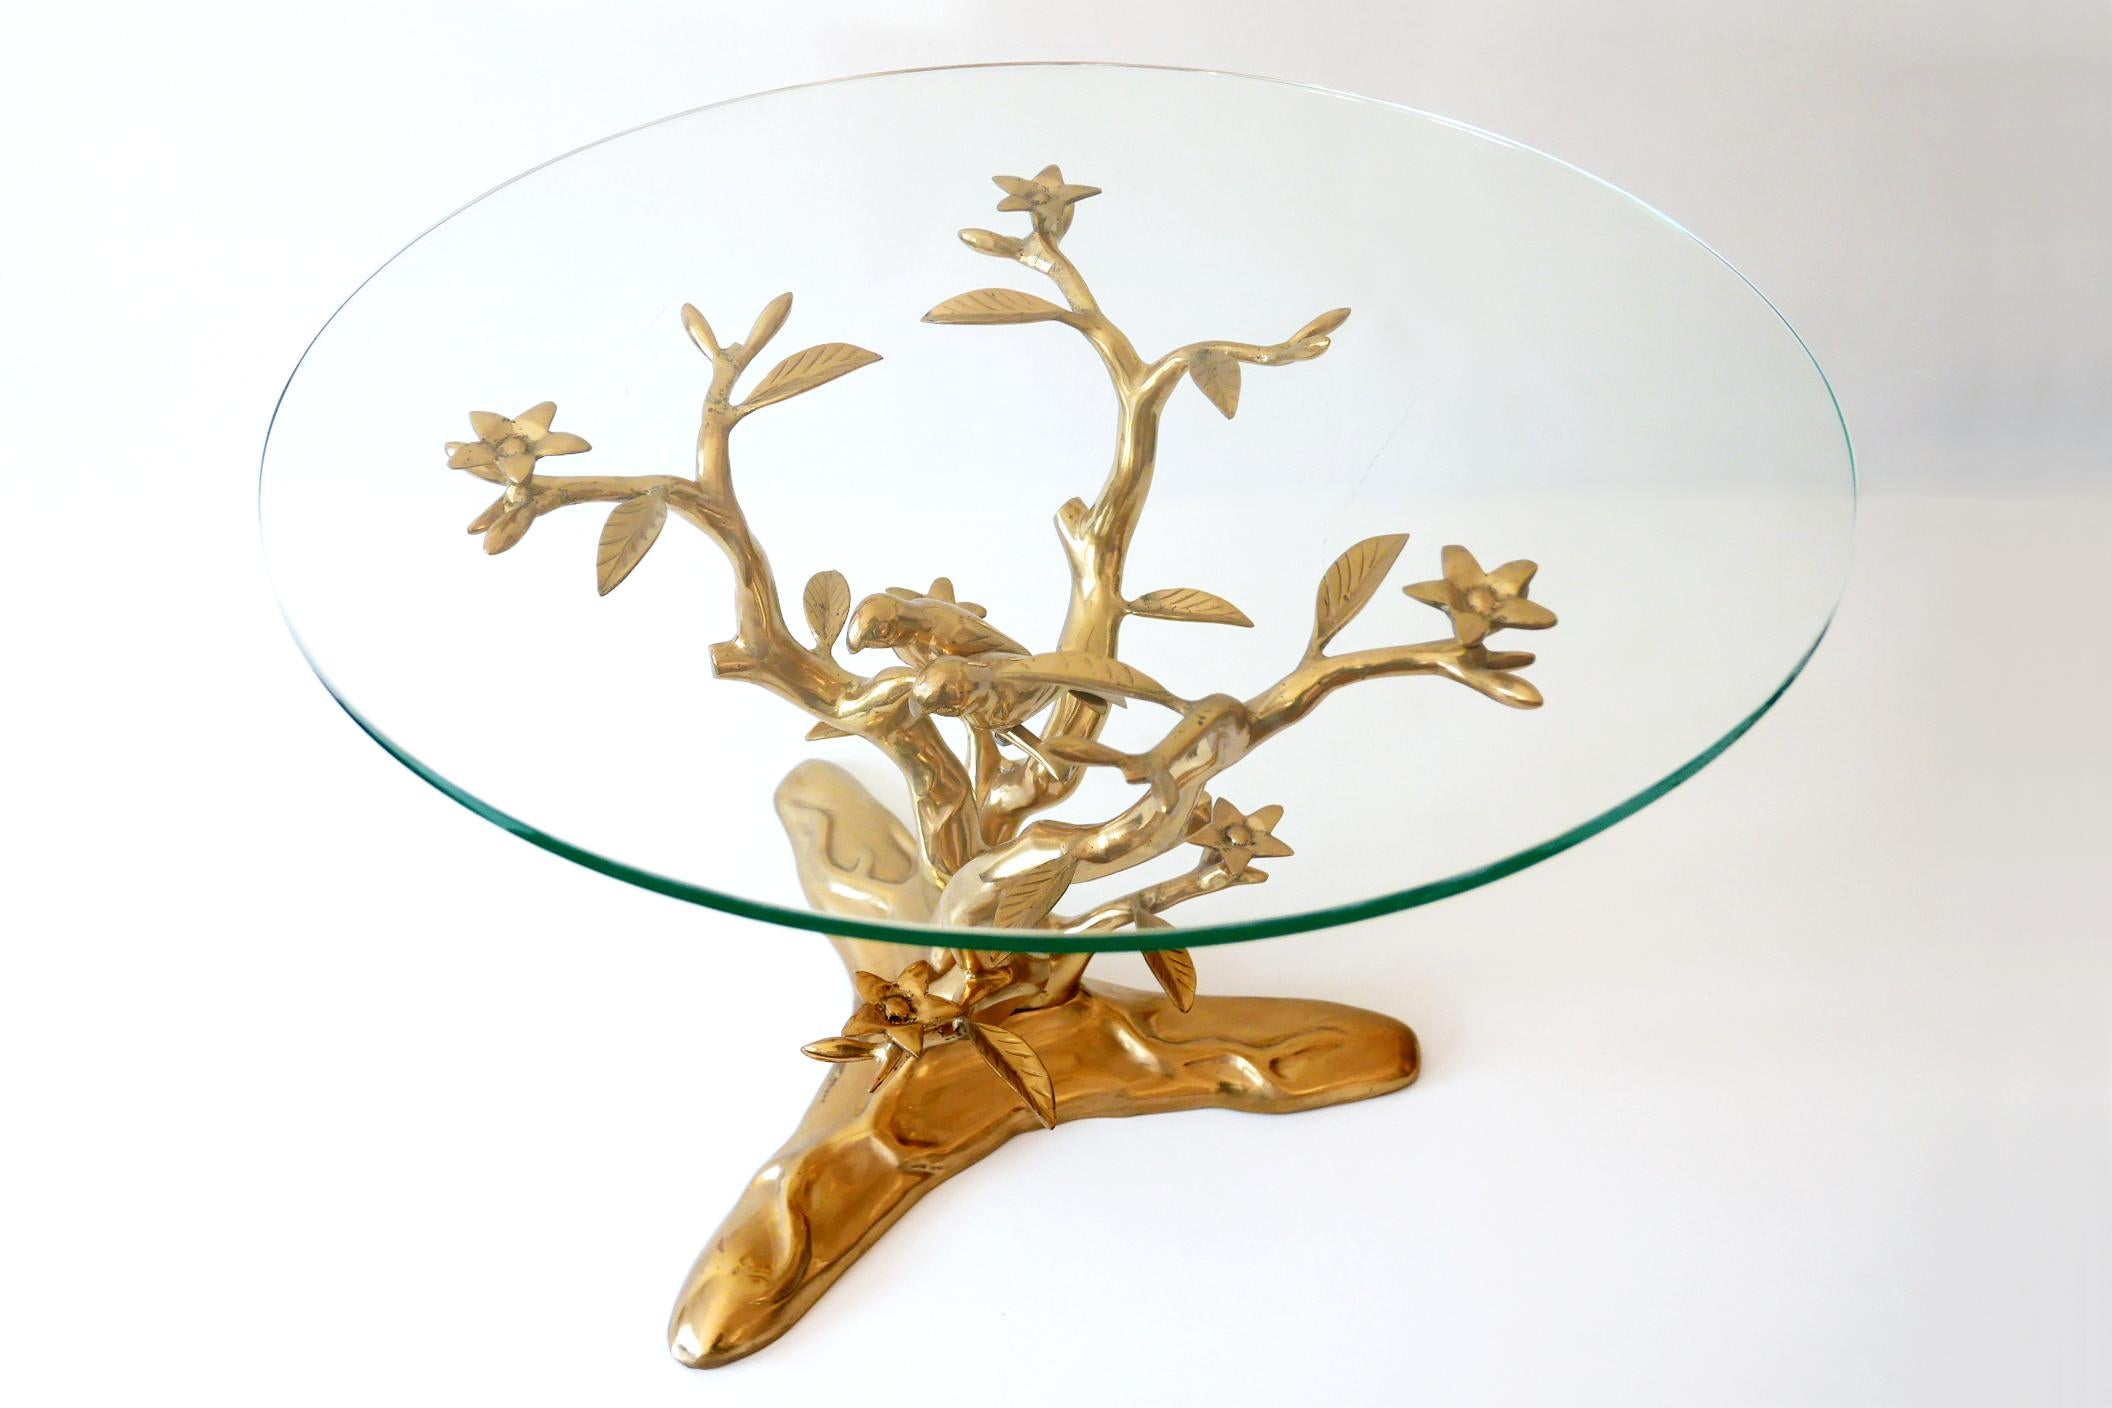 Glass Sculptural Mid-Century Modern Brass Coffee Table by Willy Daro, Belgium, 1970s